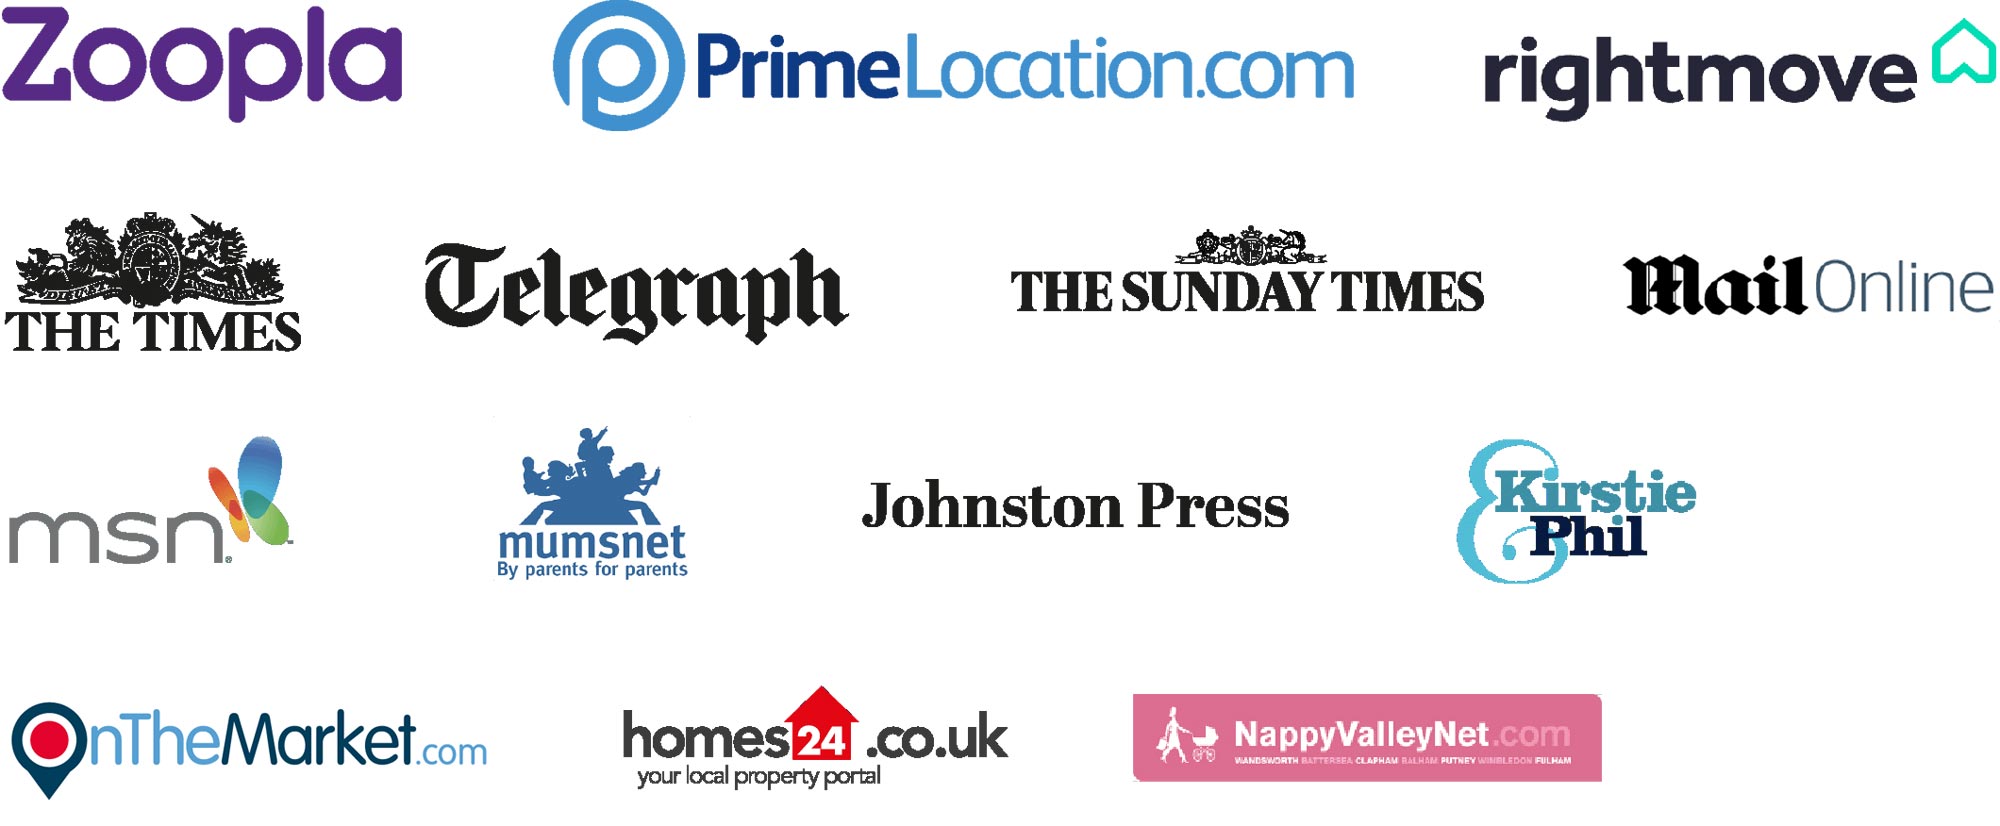 Telegraph, the Times and the Sunday Times, plus MSN, Mumsnet, Homes 24.co.uk, Kirstie and Phil websites